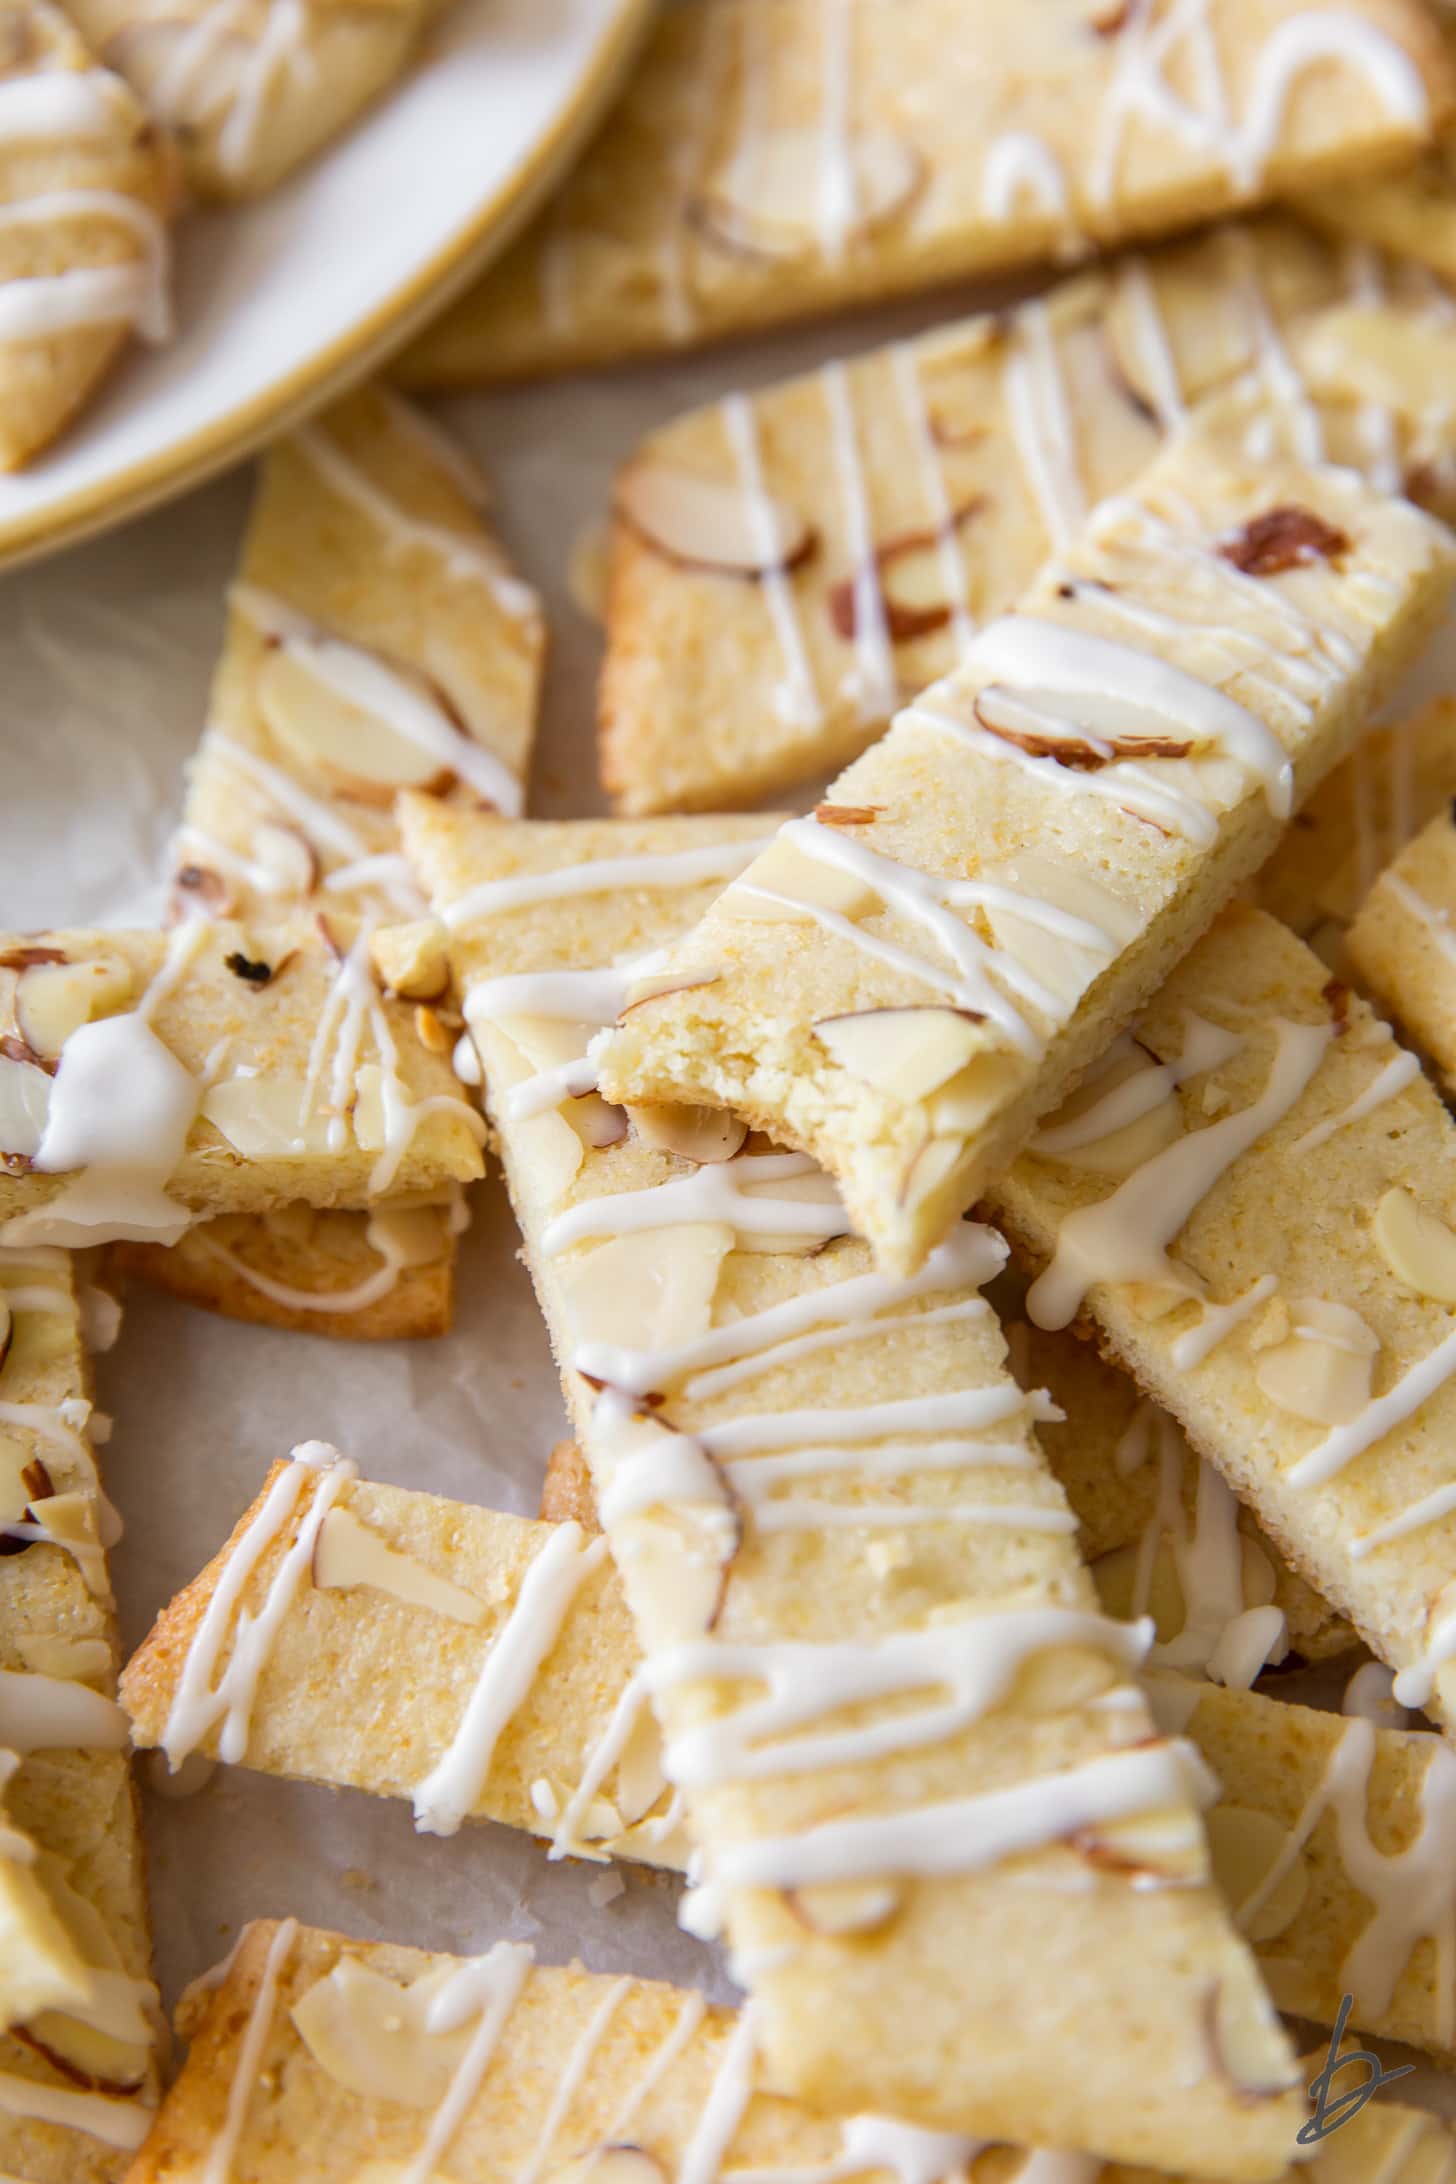 pile of scandinavian almond bars with icing and slivered almonds with top bar missing a bite